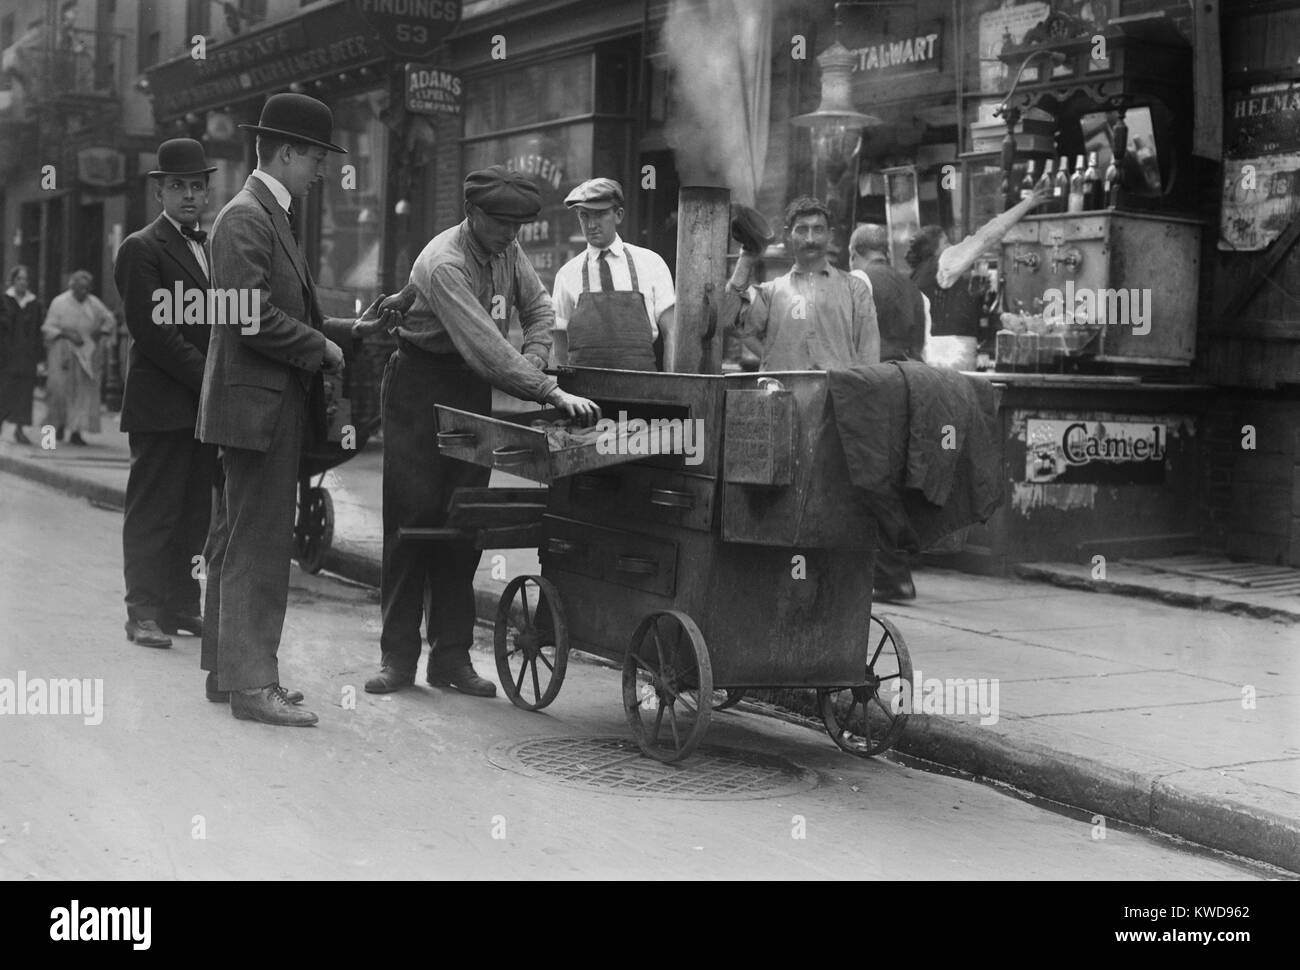 Baked potato vendor with a pushcart oven in New York's Lower East Side, c. 1915-20. The neighborhood was packed with Eastern European Jewish immigrants (BSLOC 2016 8 81) Stock Photo